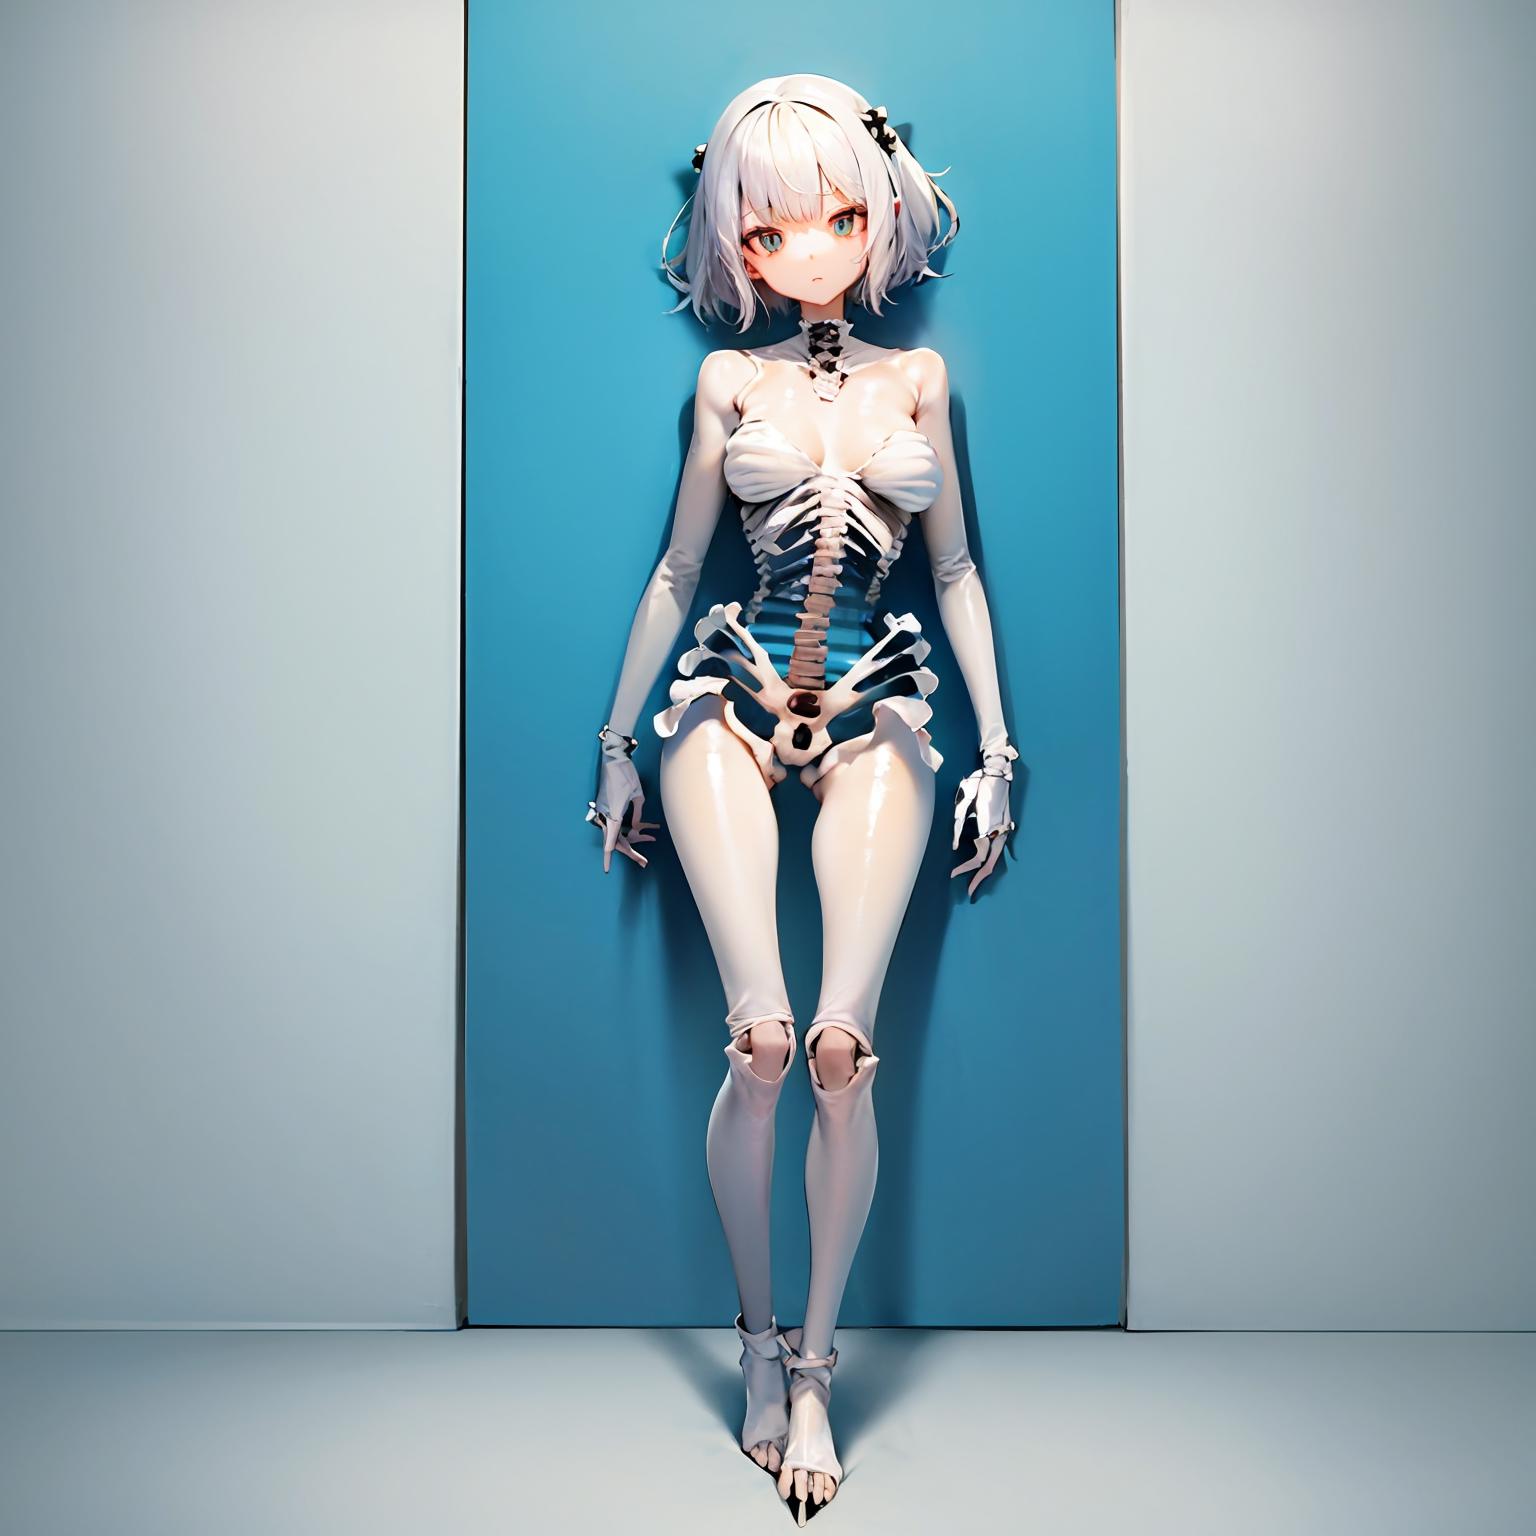 AI model image by ttplanet